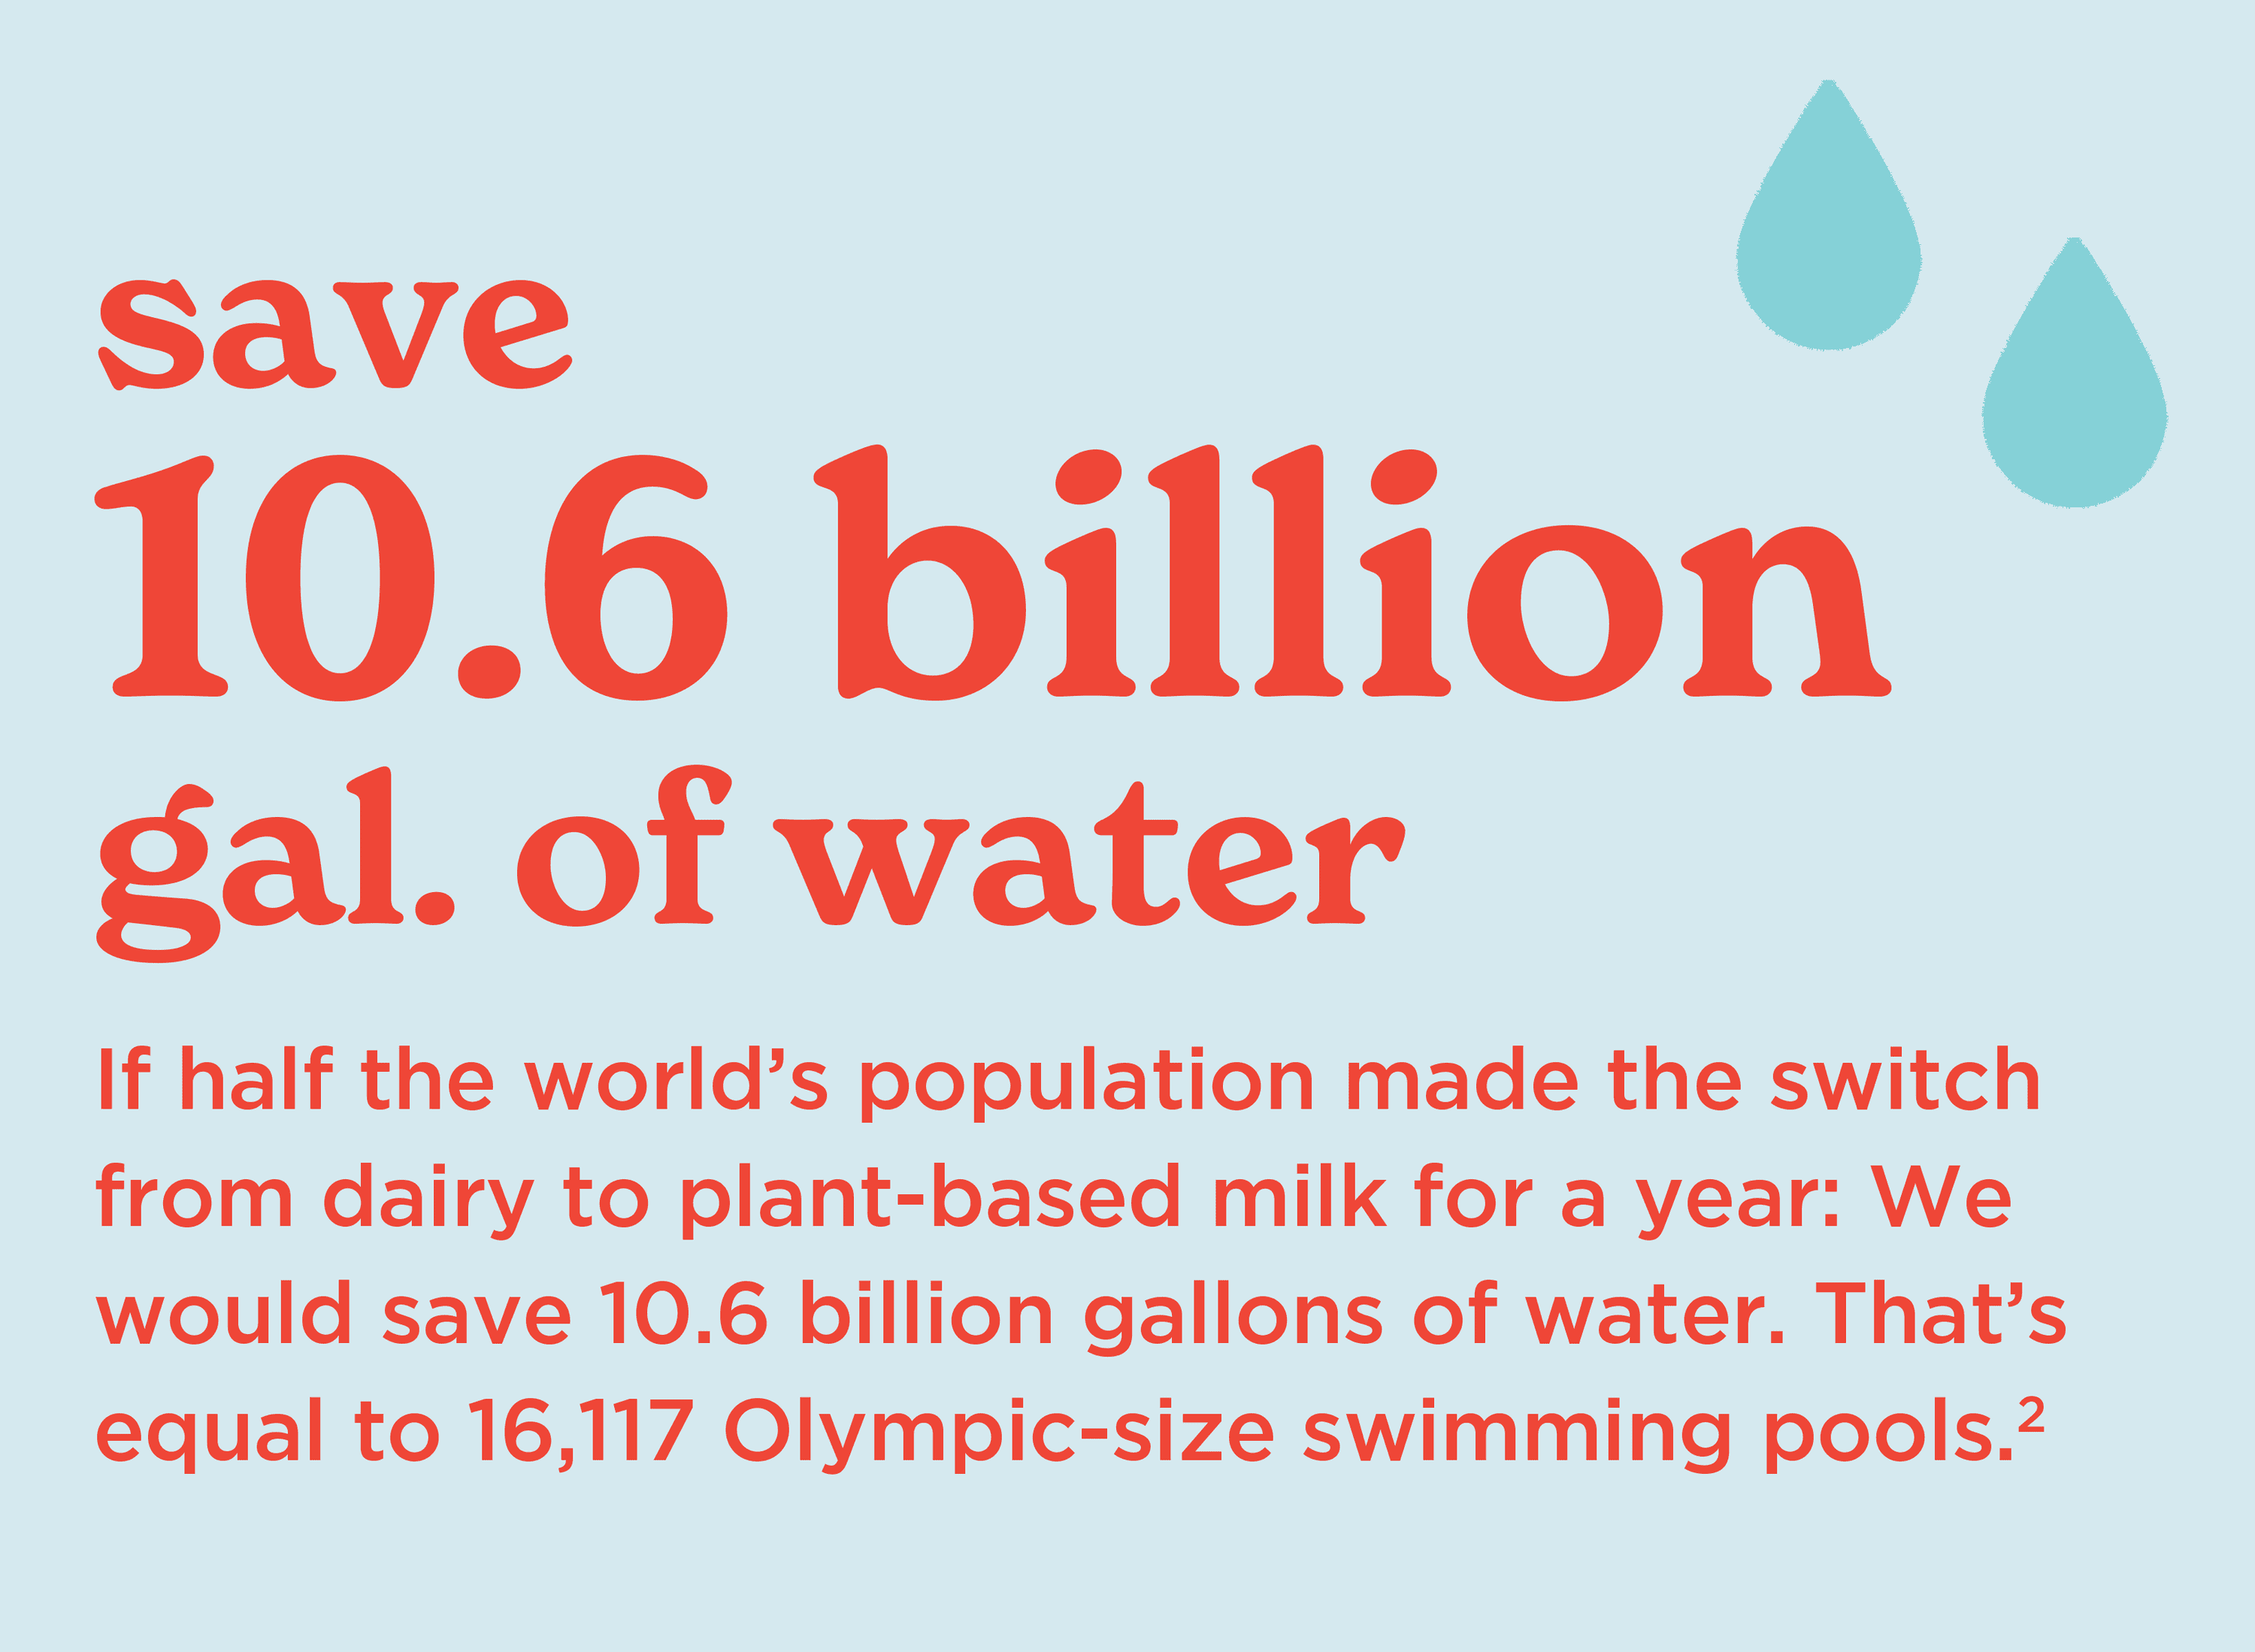 save 10.6 billion gal. of water infographic